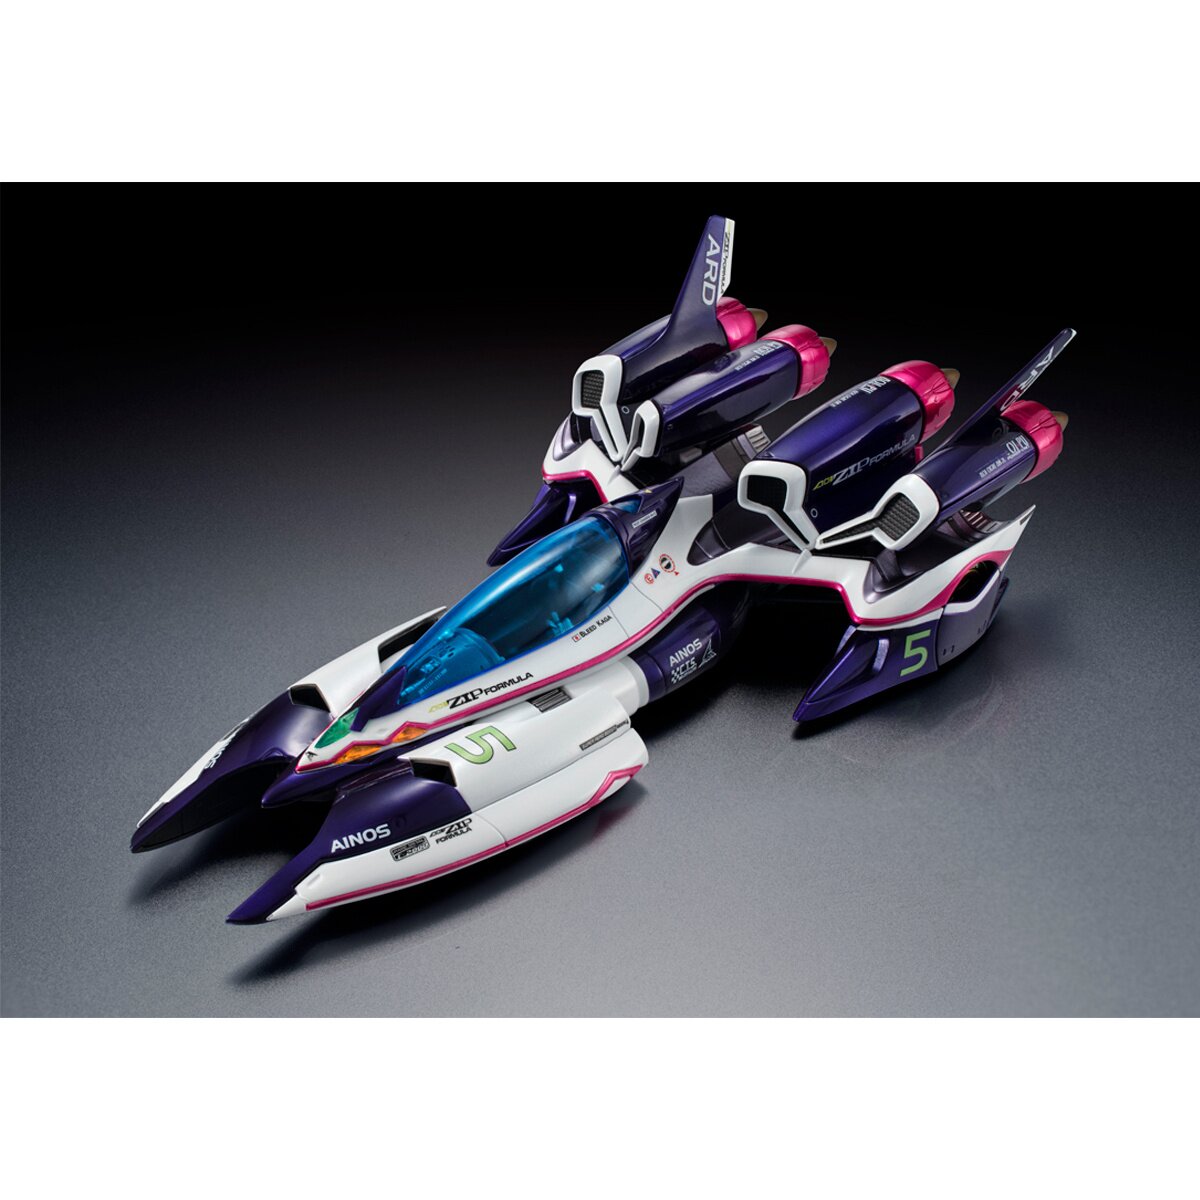 Variable Action Future GPX Cyber Formula SIN Ogre AN-21 -Livery Edition- DX  Set w/ Bonus Photo Cards